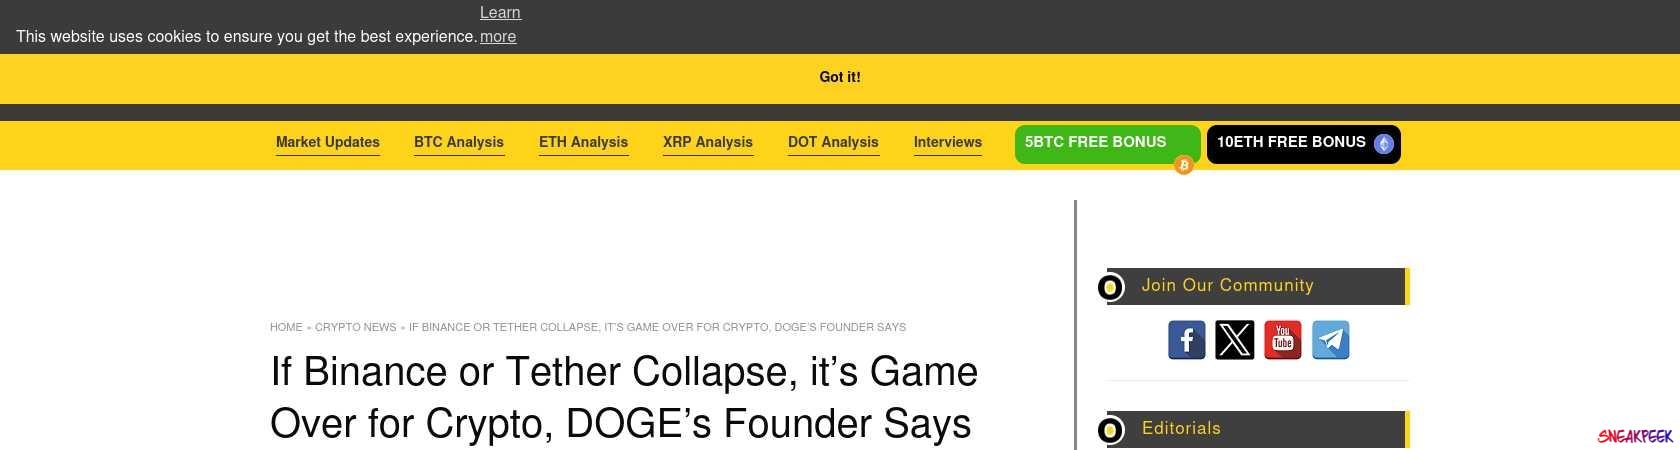 Read the full Article:  ⭲ If Binance or Tether Collapse, it’s Game Over for Crypto, DOGE’s Founder Says